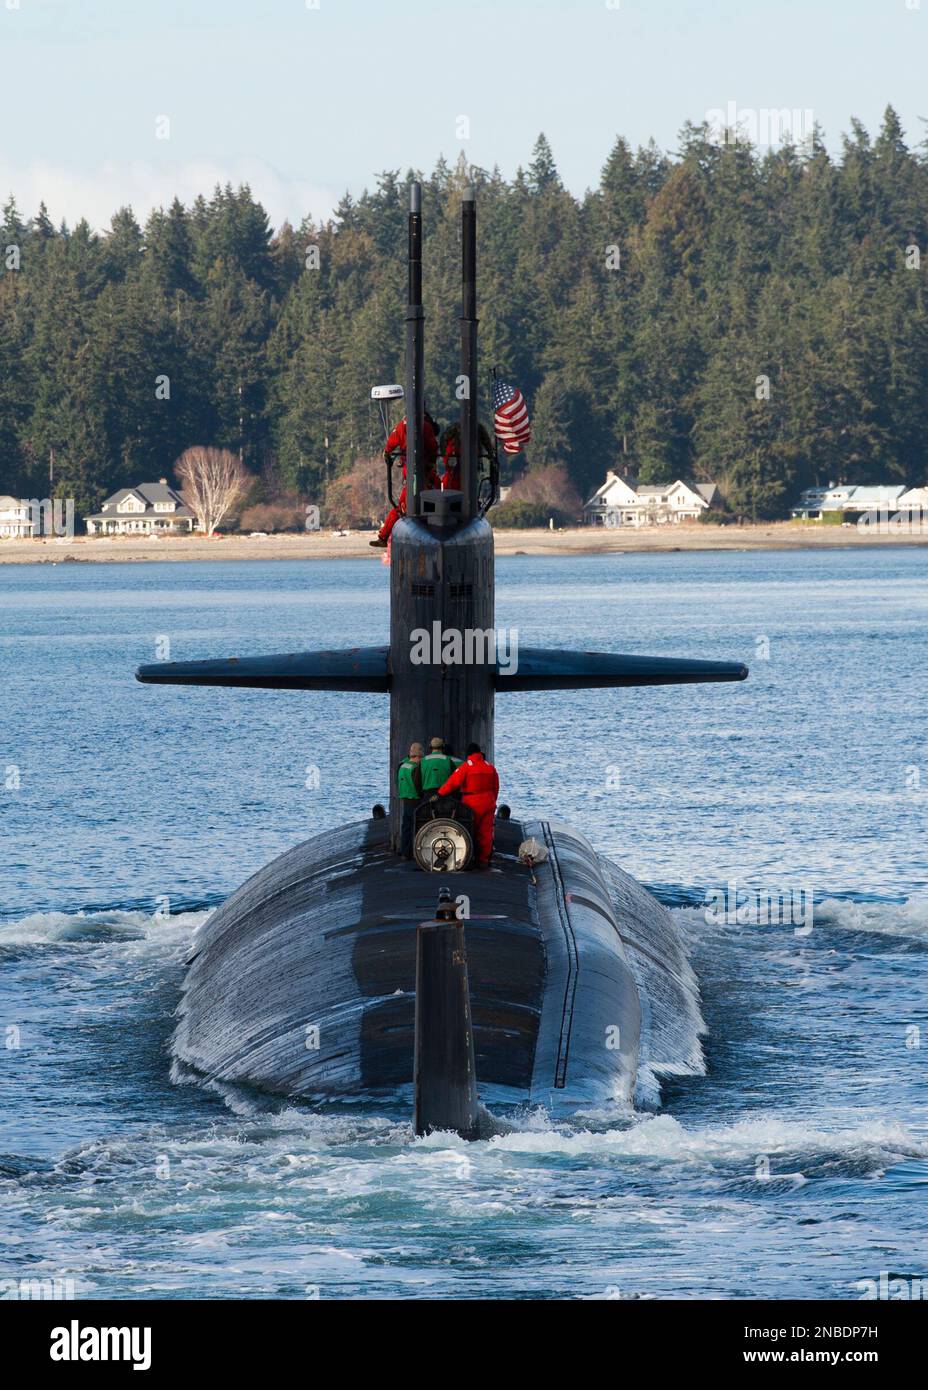 230210-N-ED185-1189  PUGET SOUND, Wash. (Feb. 10, 2023) The Los Angeles-class fast-attack submarine USS Key West (SSN 722) transits the Puget Sound before mooring at Naval Base Kitsap – Bremerton, Washington, February 10, 2023. Measuring more than 360 feet long and weighing more than 6,900 tons when submerged, Key West supports a multitude of missions to include anti-submarine warfare, anti-surface ship warfare, surveillance and reconnaissance, and strike warfare. (U.S. Navy Photo by Mass Communication Specialist 1st Class Brian. G. Reynolds) Stock Photo